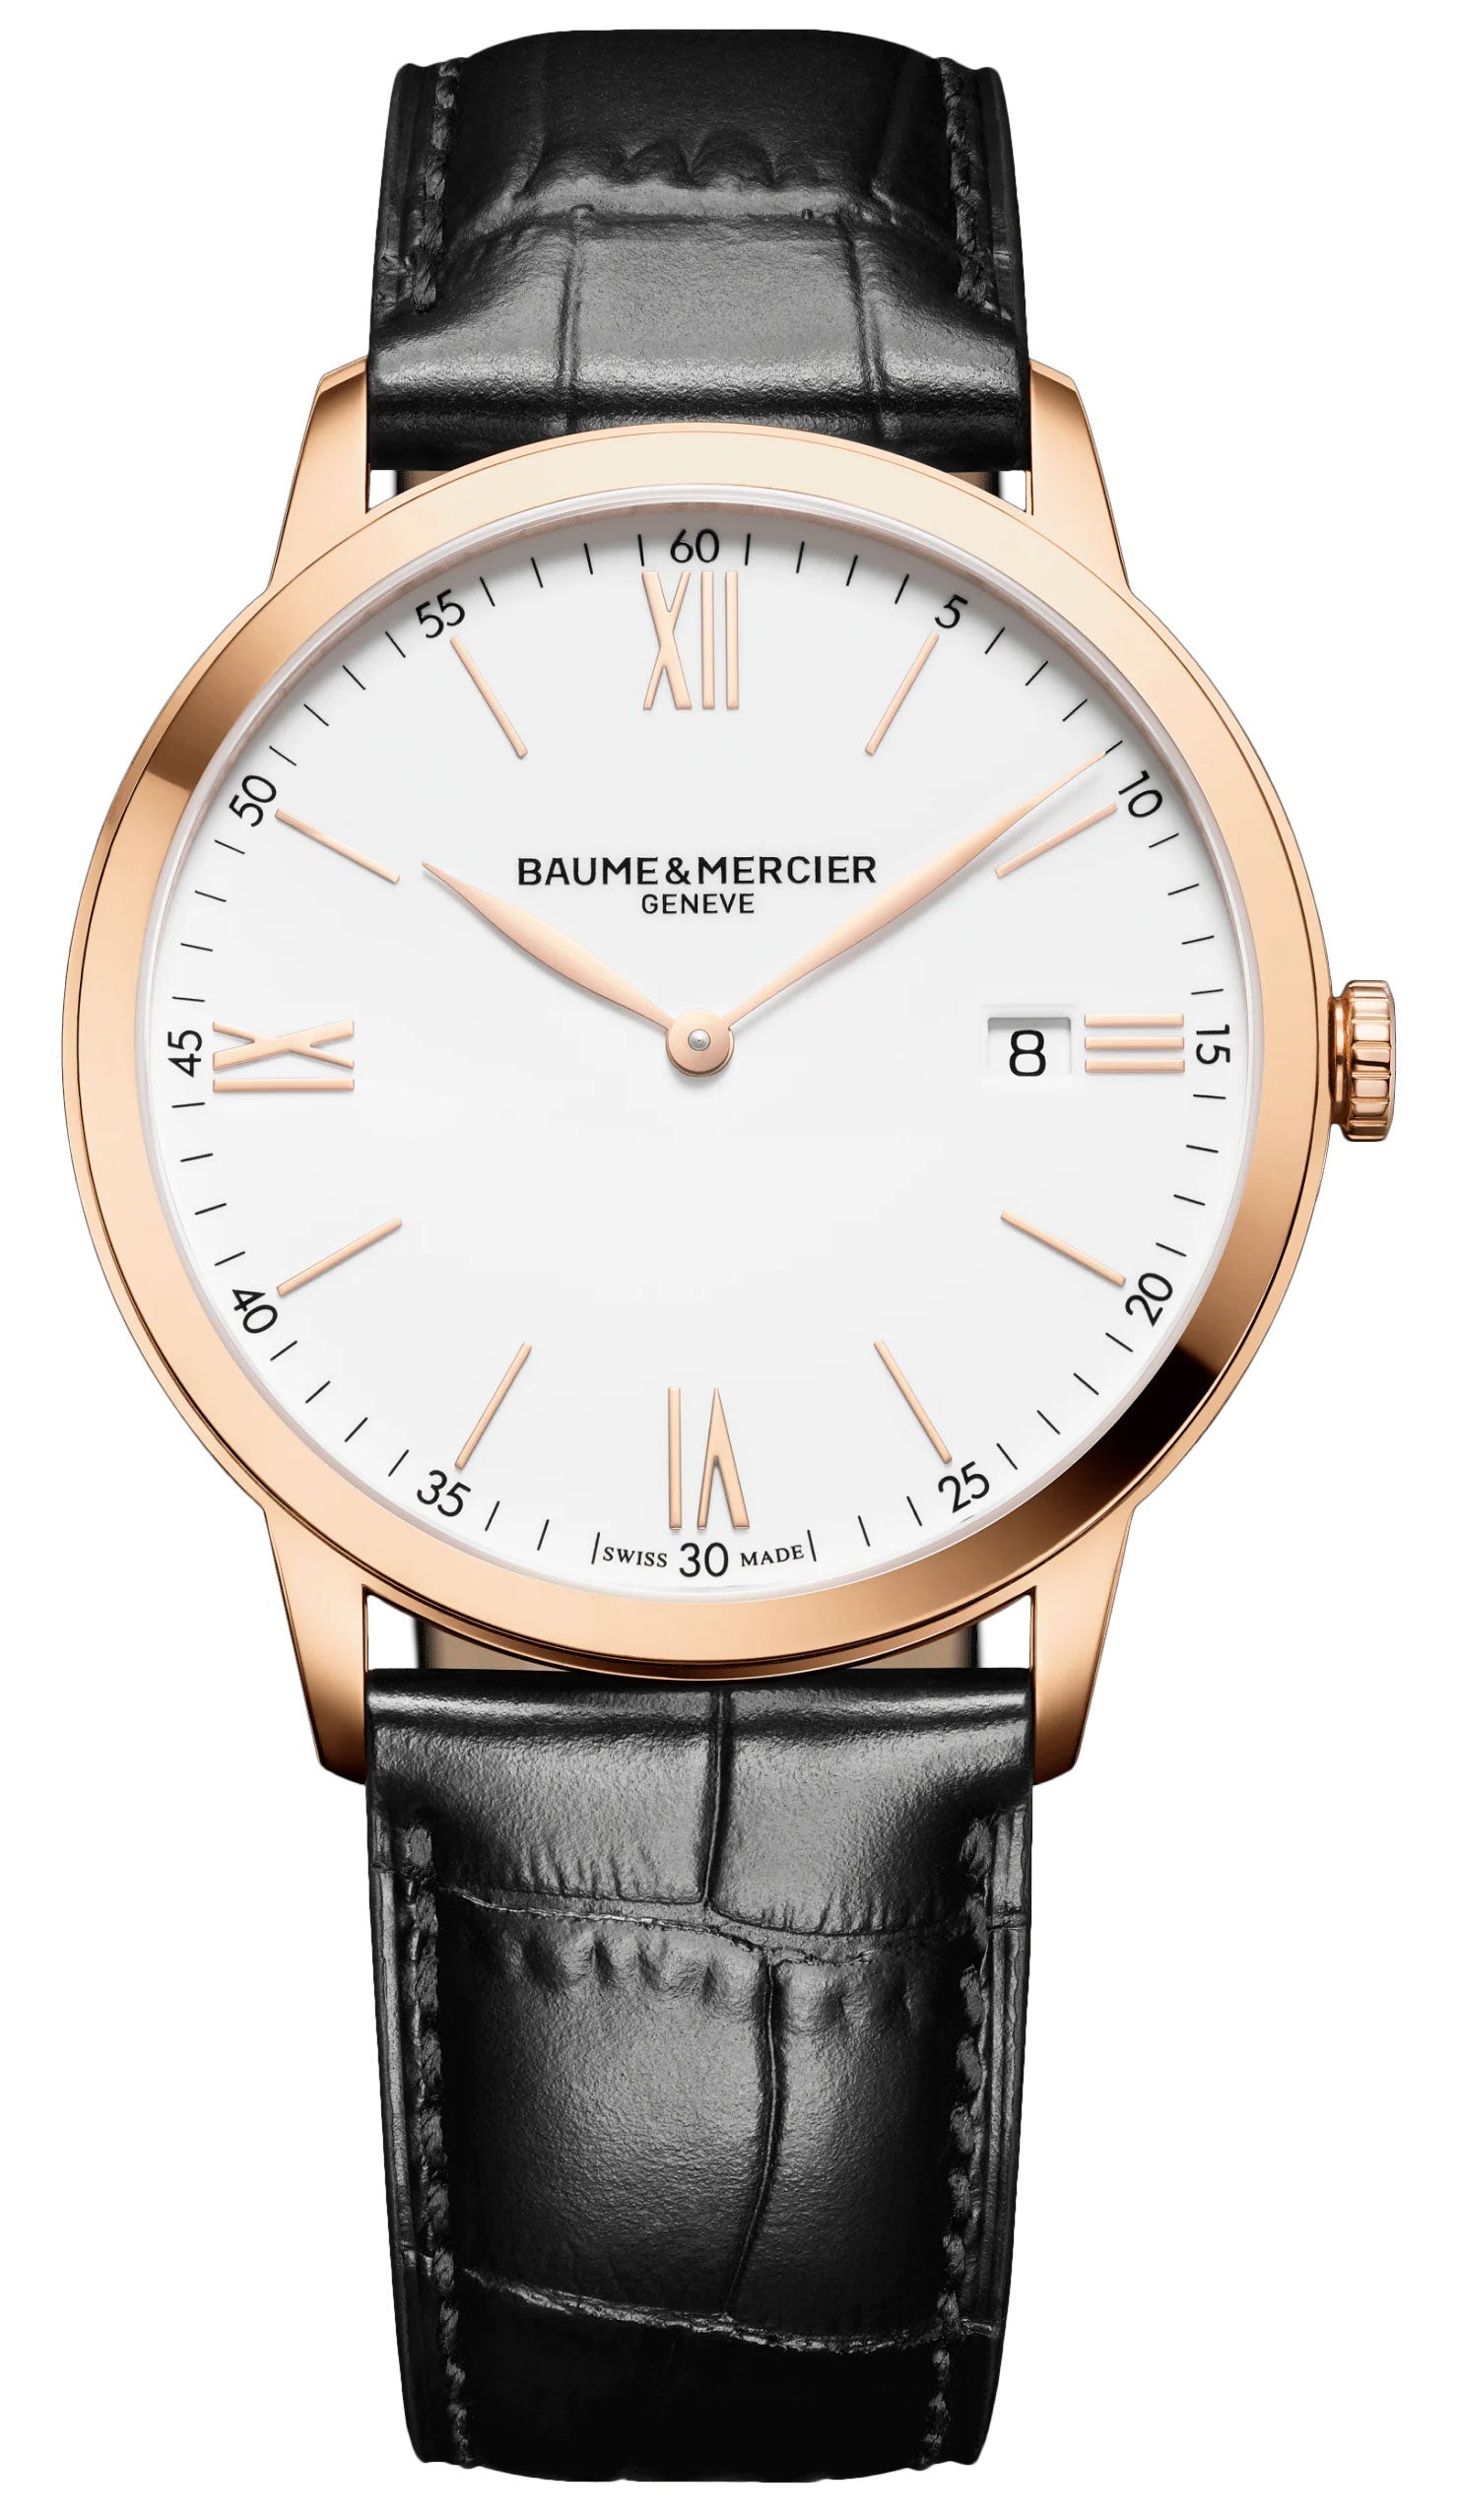 update alt-text with template Watches - Mens-Baume & Mercier-M0A10441-35 - 40 mm, 40 - 45 mm, Baume & Mercier, Classima, date, leather, mens, menswatches, new arrivals, rose gold plated, round, rpSKU_M0A10356, rpSKU_M0A10382, rpSKU_M0A10414, rpSKU_M0A10453, rpSKU_M0A10607, swiss quartz, watches, white-Watches & Beyond